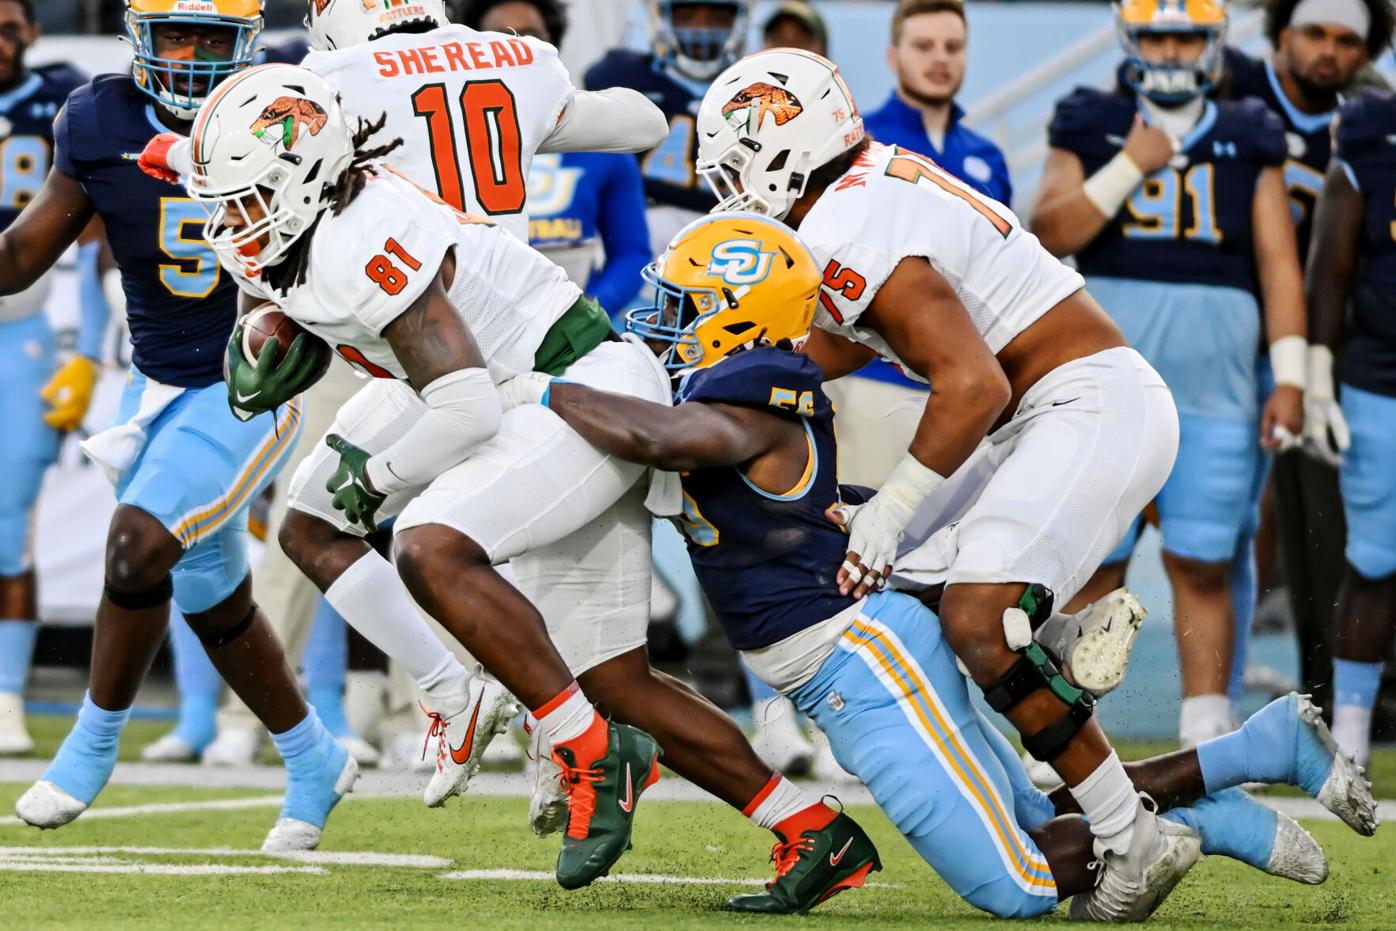 Southern's offense struggles in loss to FAMU on the road